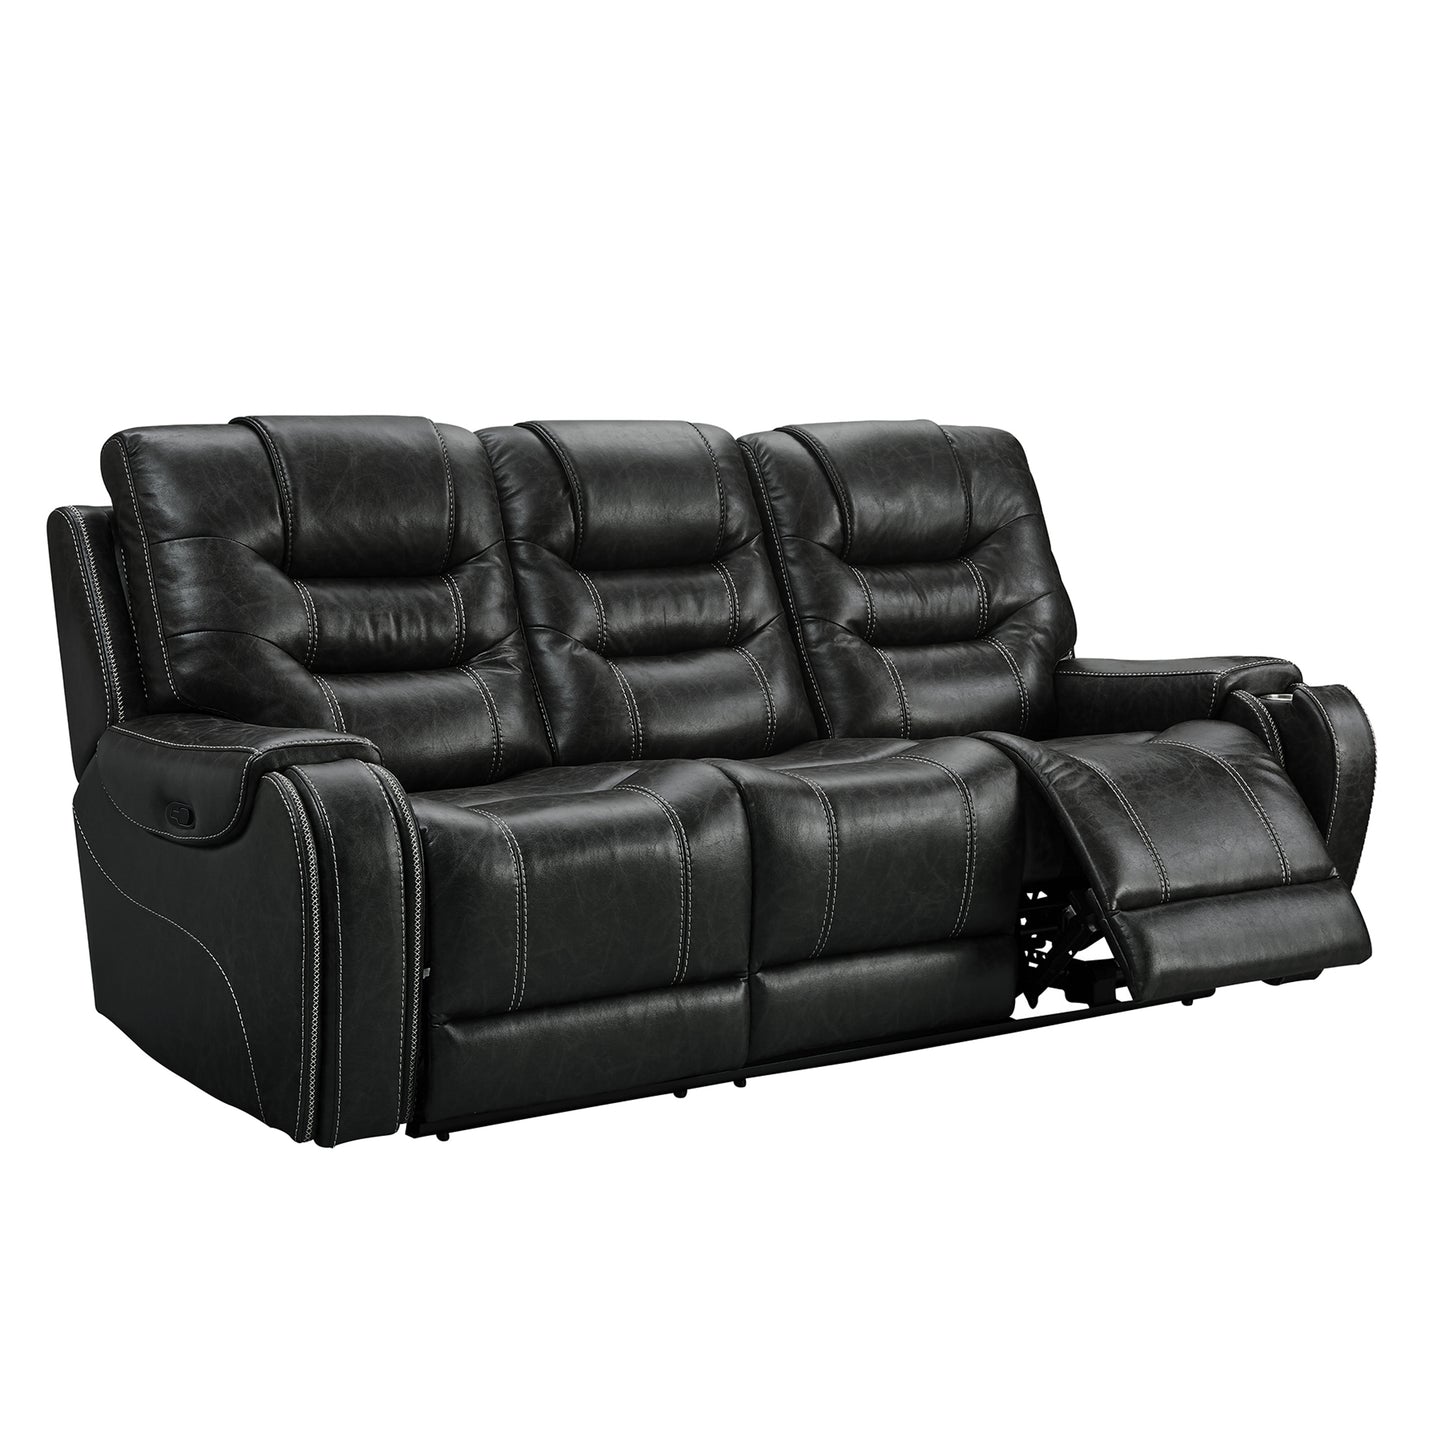 Rowena Contemporary Faux Leather Reclining Living Room Collection, Smoke